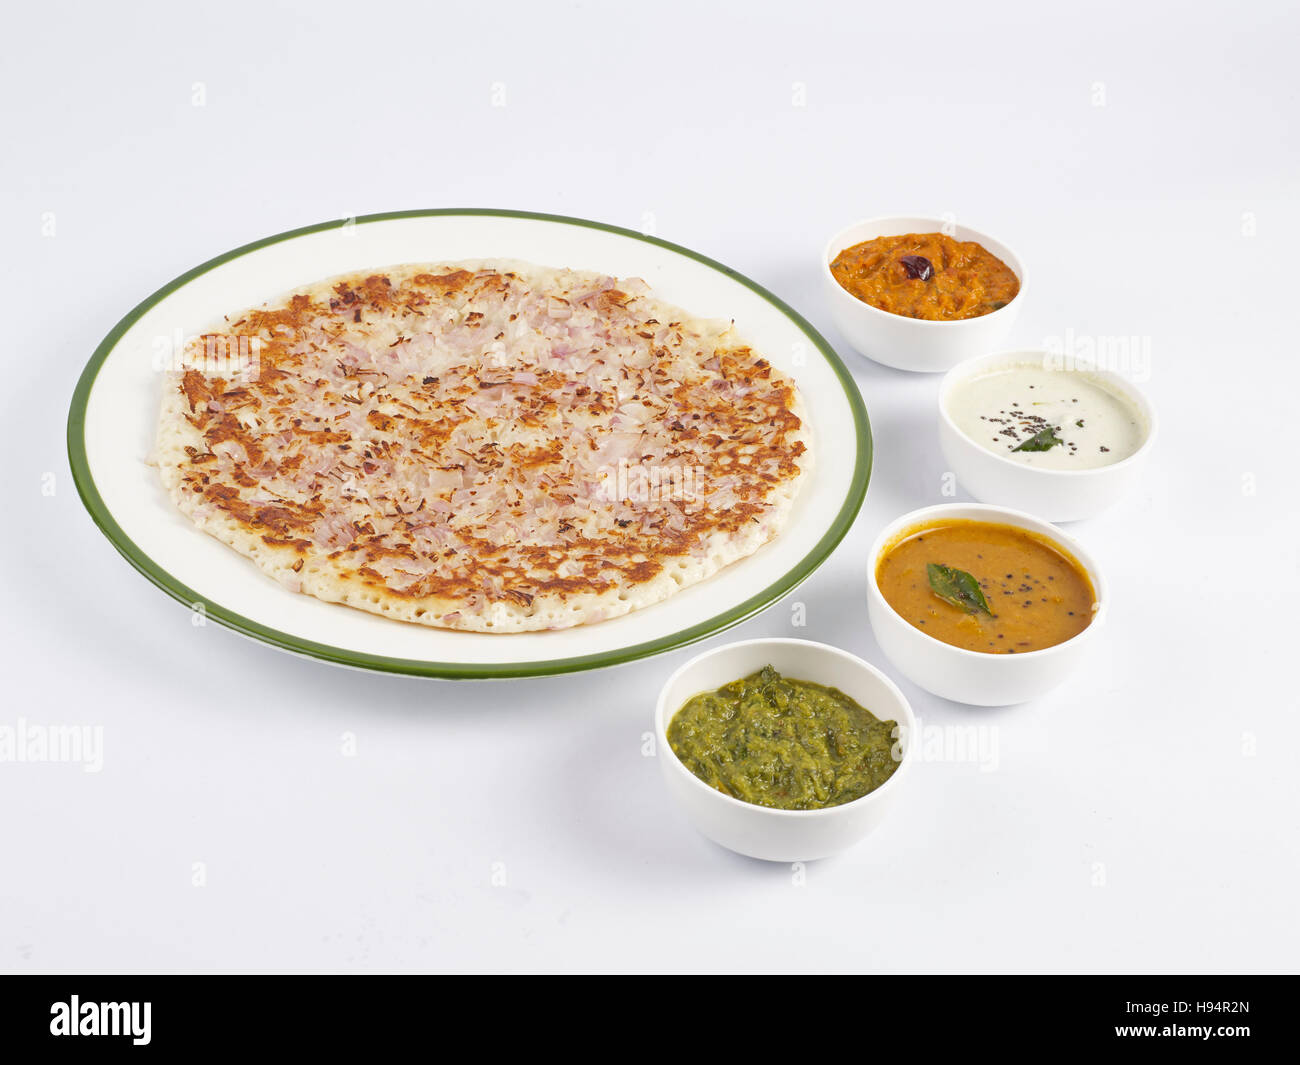 Onion uthappam in a plate served with sambar and three types of chutneys is a traditional south Indian tiffin on a white background Stock Photo